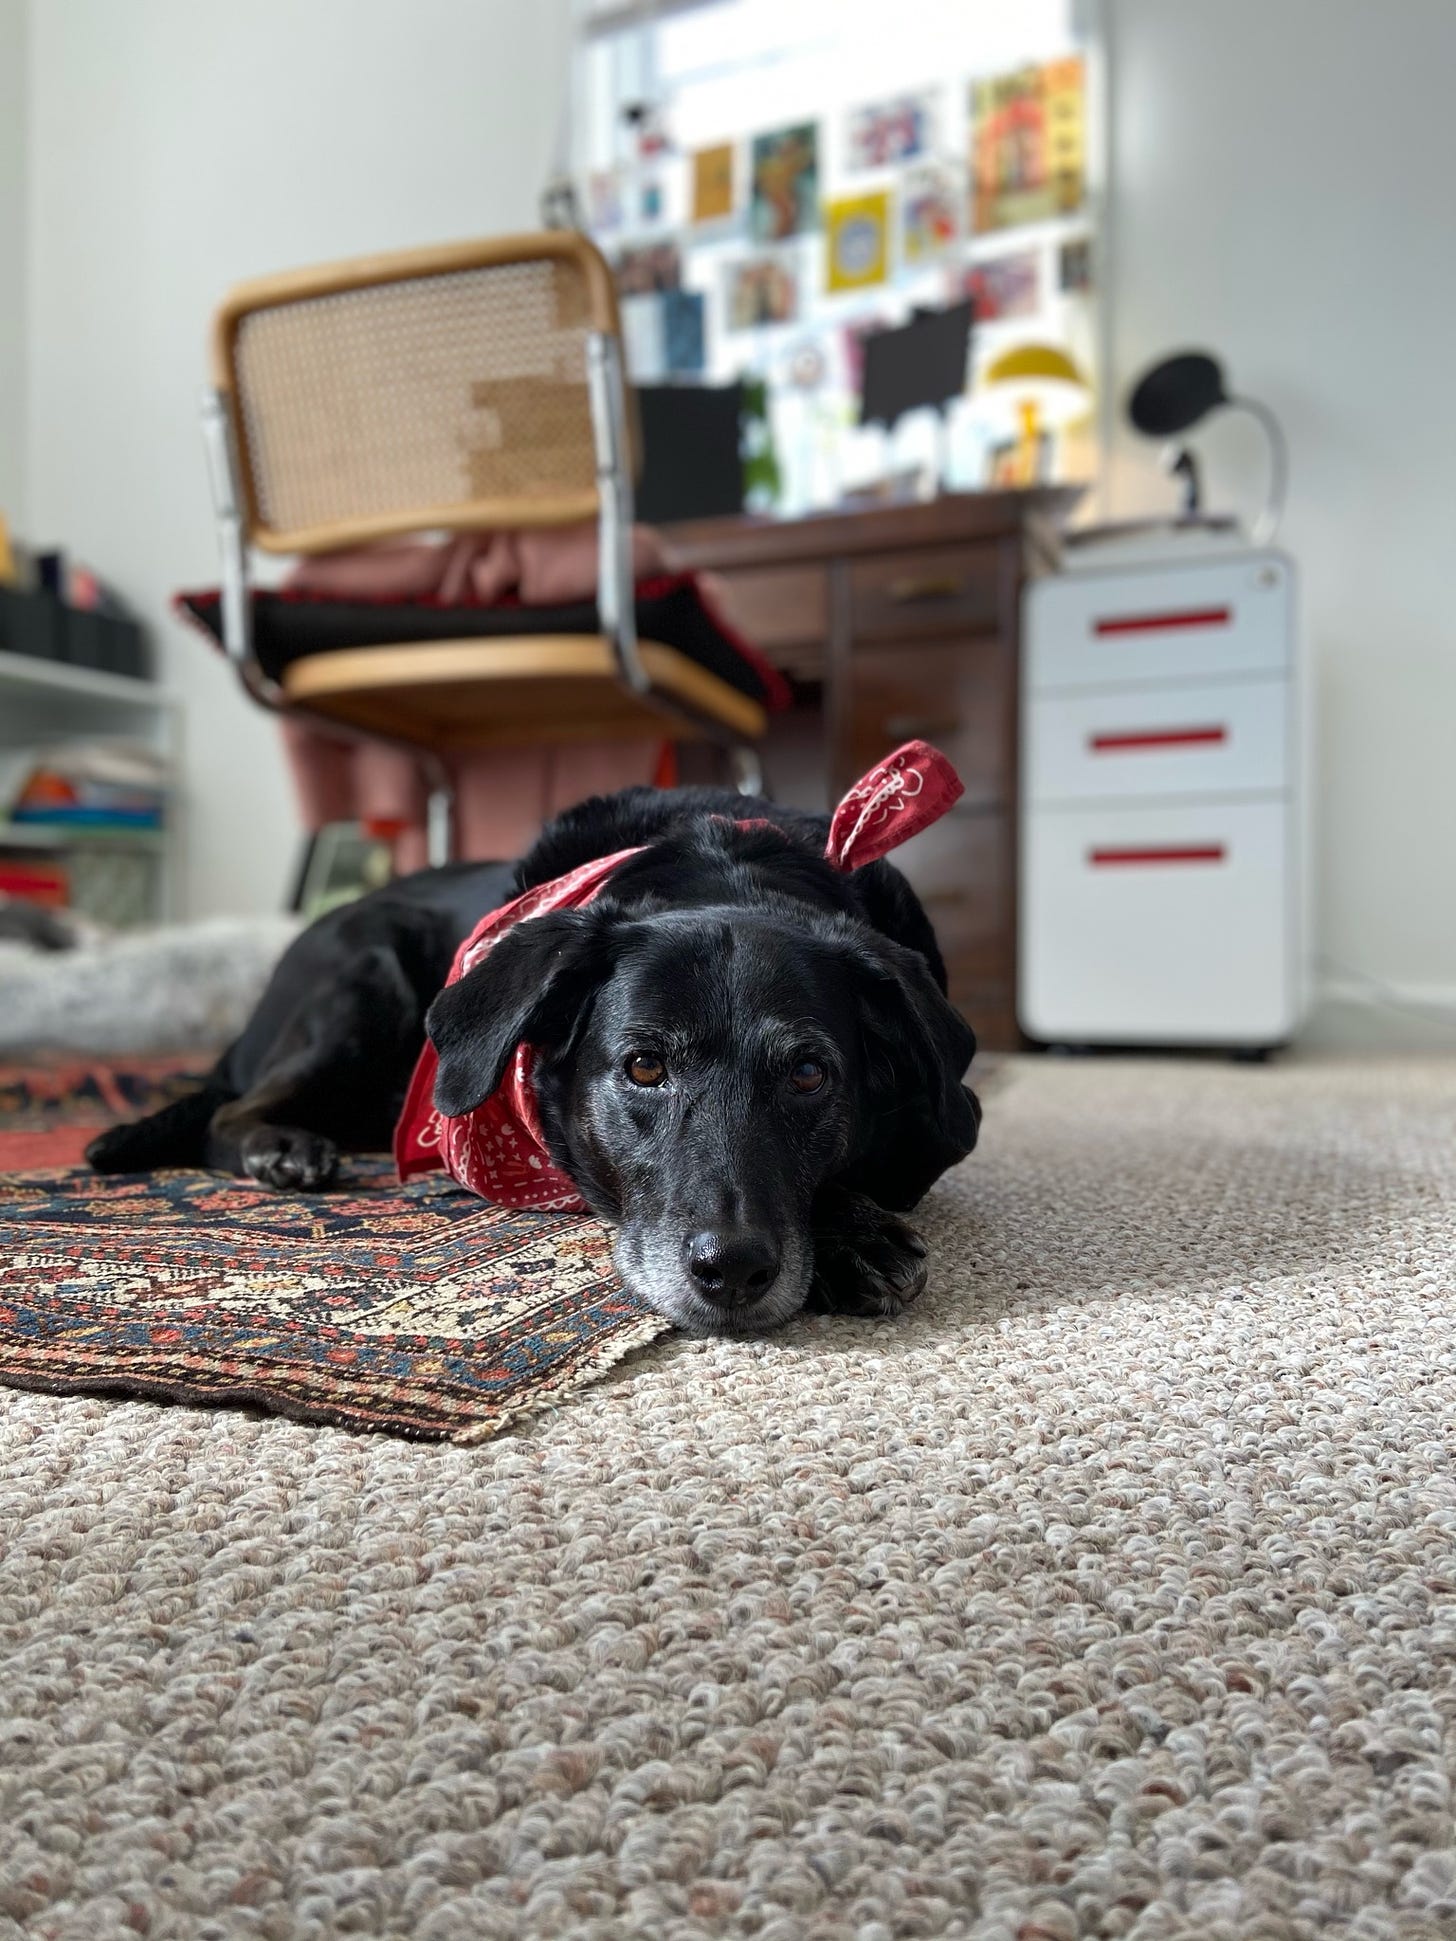 A black dog wearing a red bandana lies on the floor in focus with a desk and chair out of focus behind her.